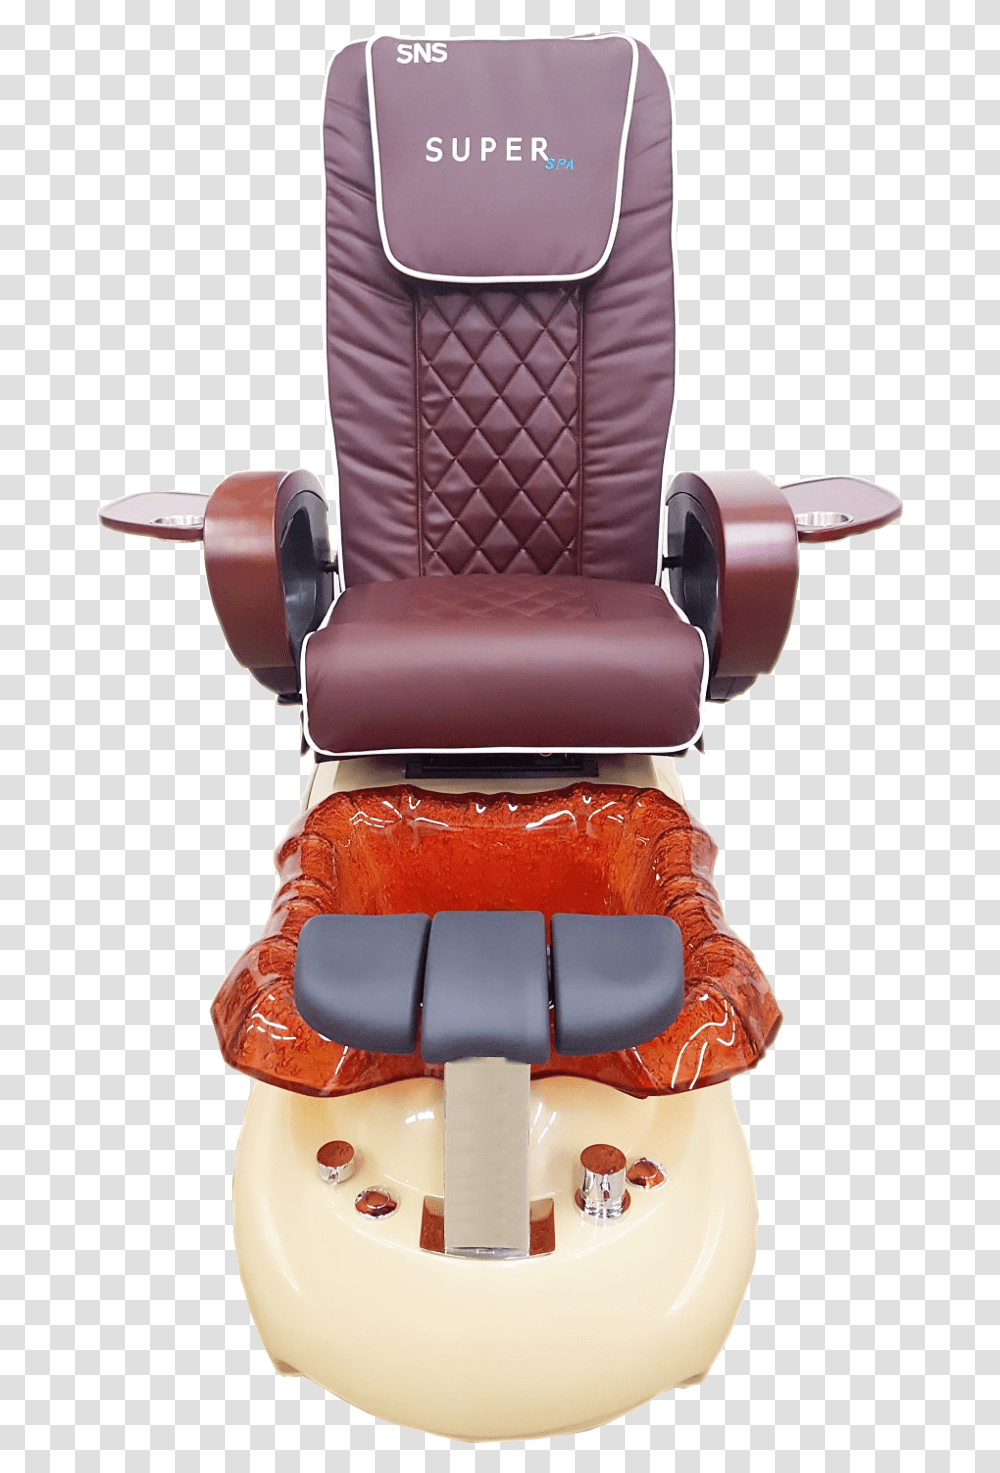 Sns S980 Pedicure Spa, Furniture, Chair, Cushion, Couch Transparent Png